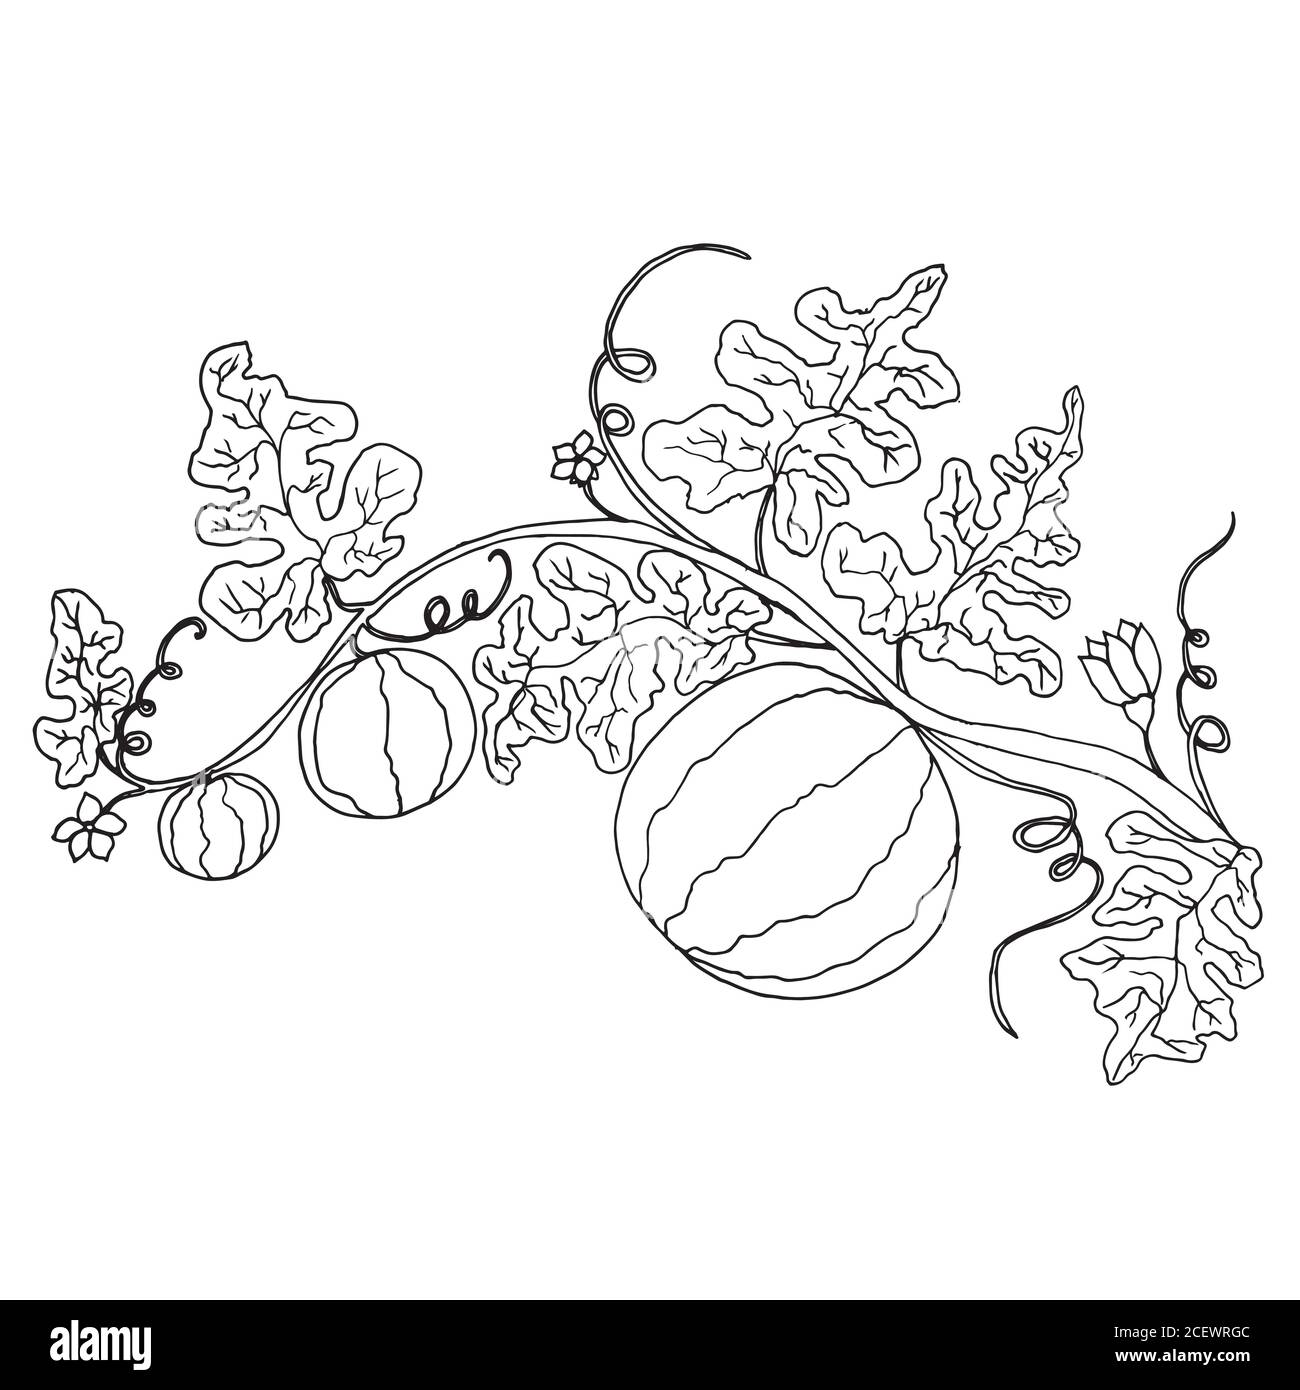 watermelon plant clipart black and white tree